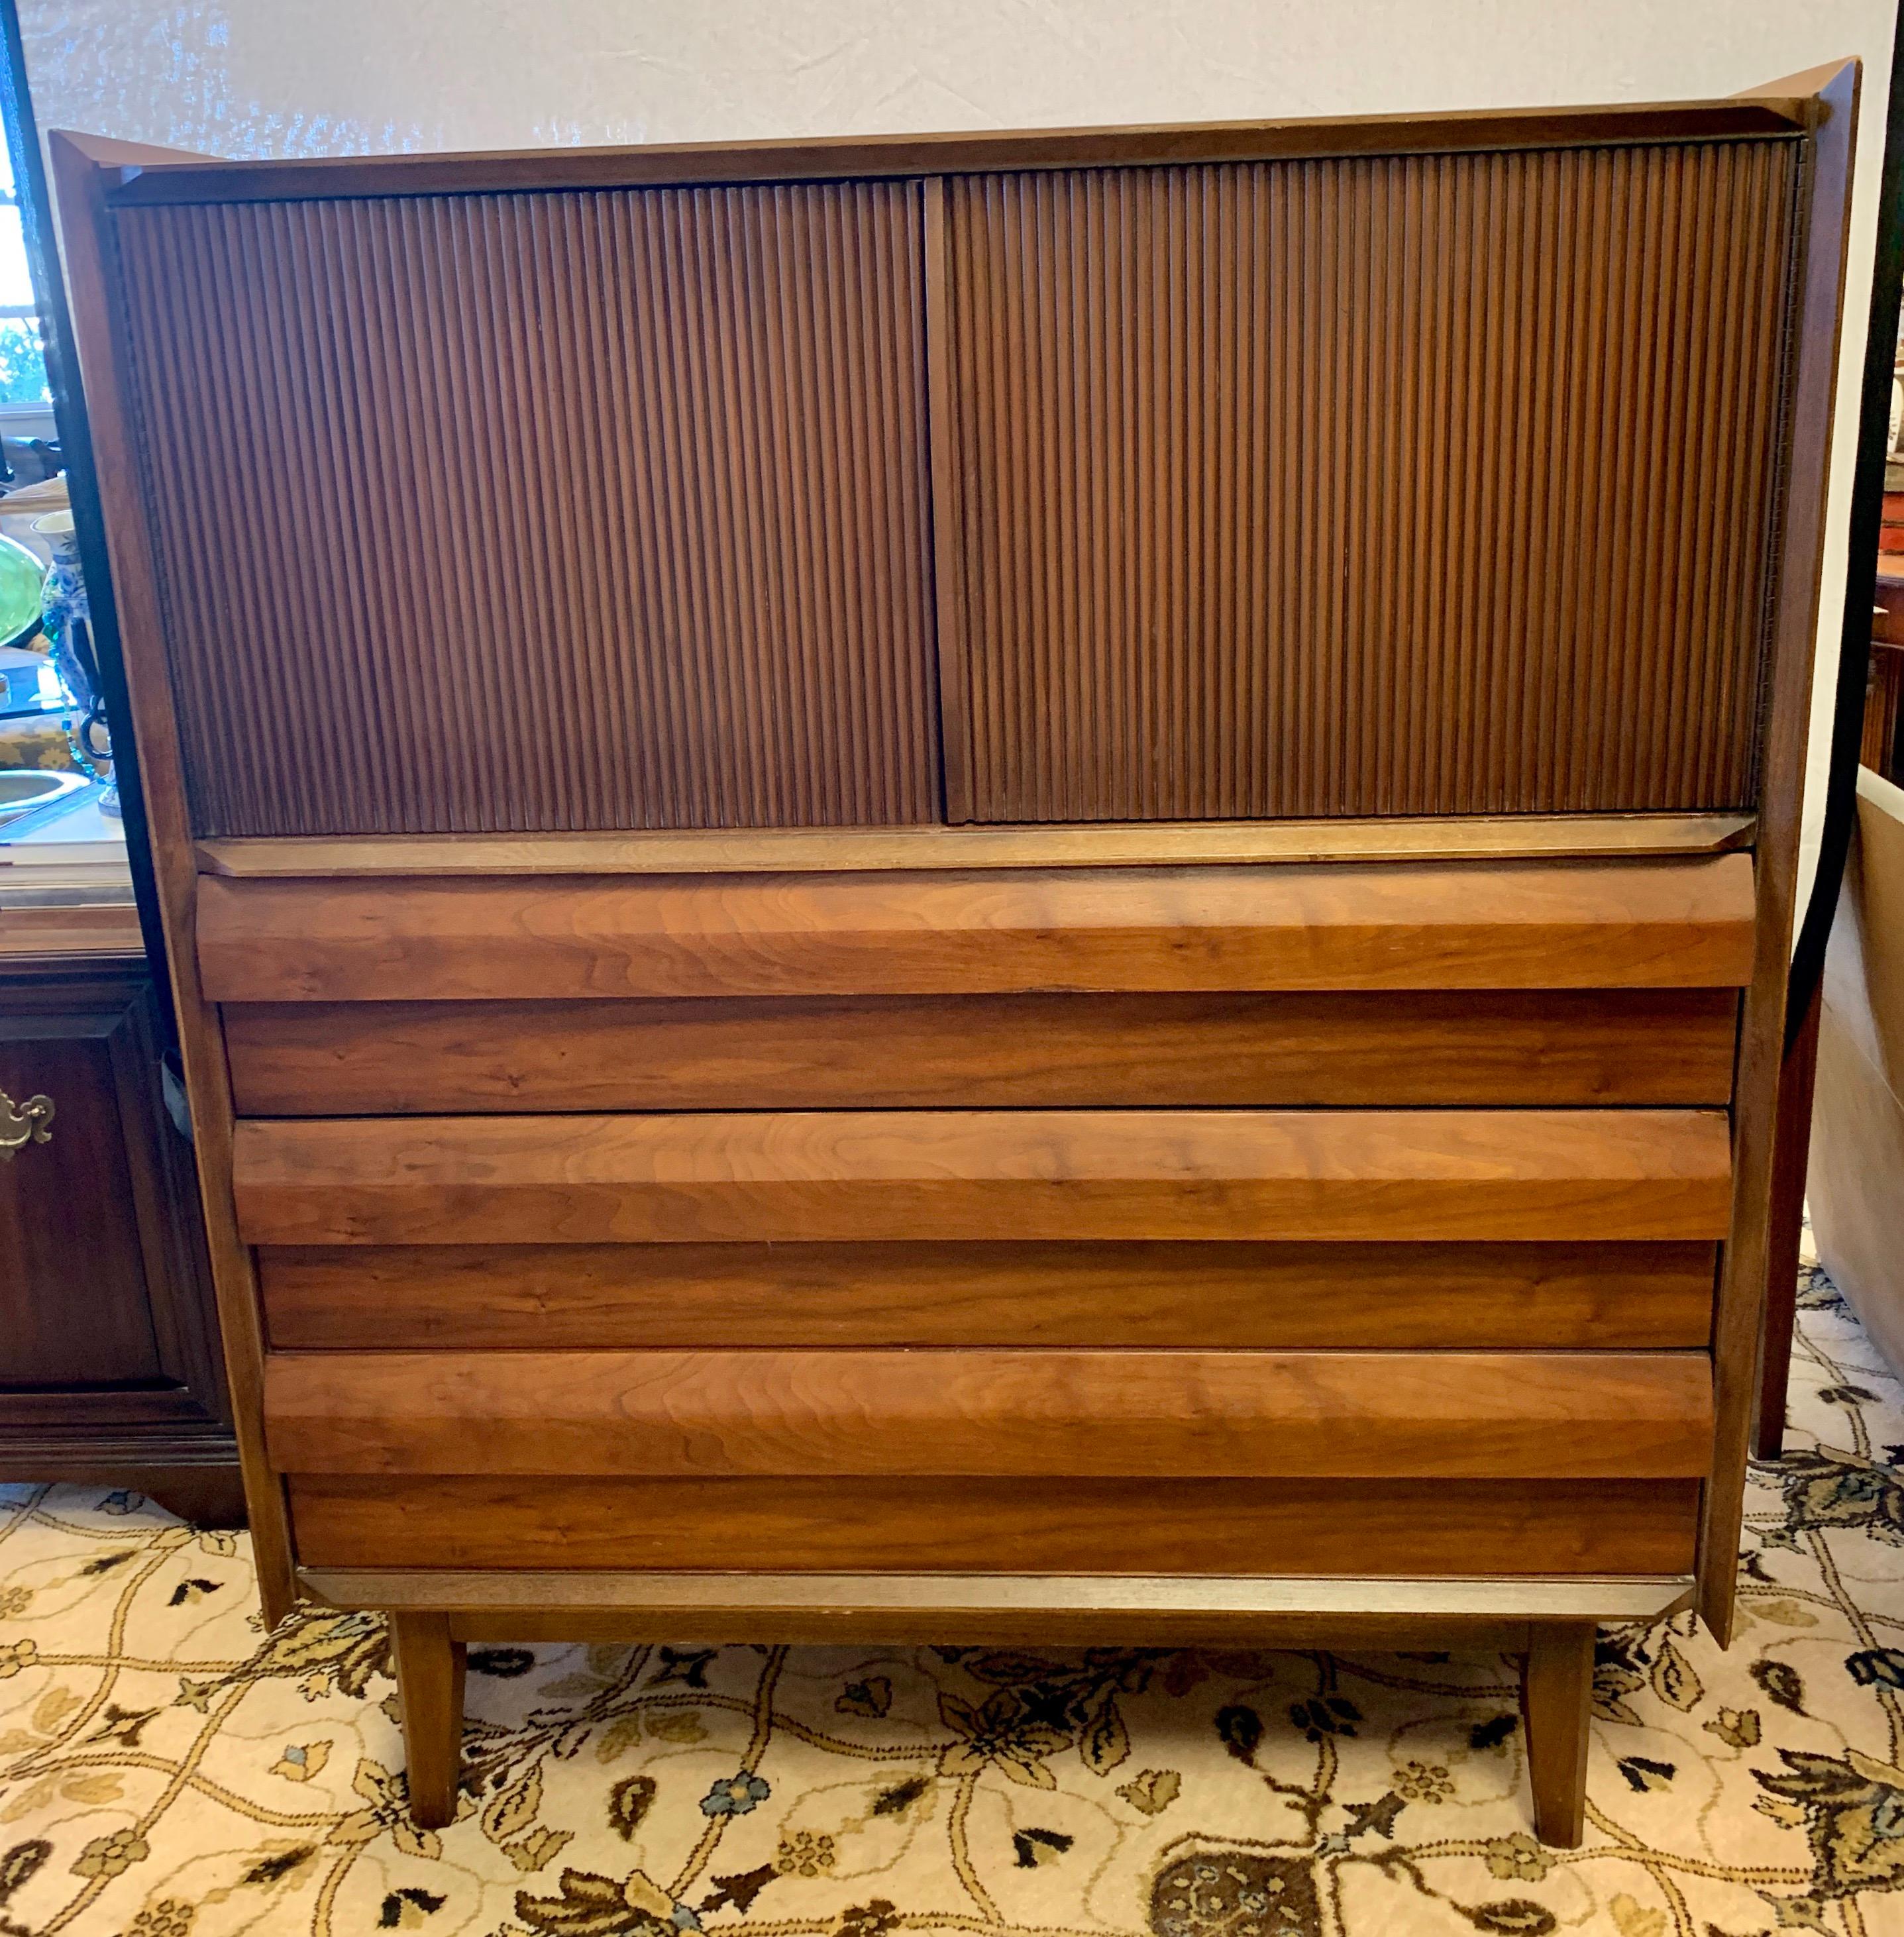 Stunning authentic Lane Altavista dresser or chest of drawers.
You will see this piece retail online for up to $4500.00 but not through RH. A truly iconic piece of midcentury, American made, furniture. What could be better? Features tambor doors at